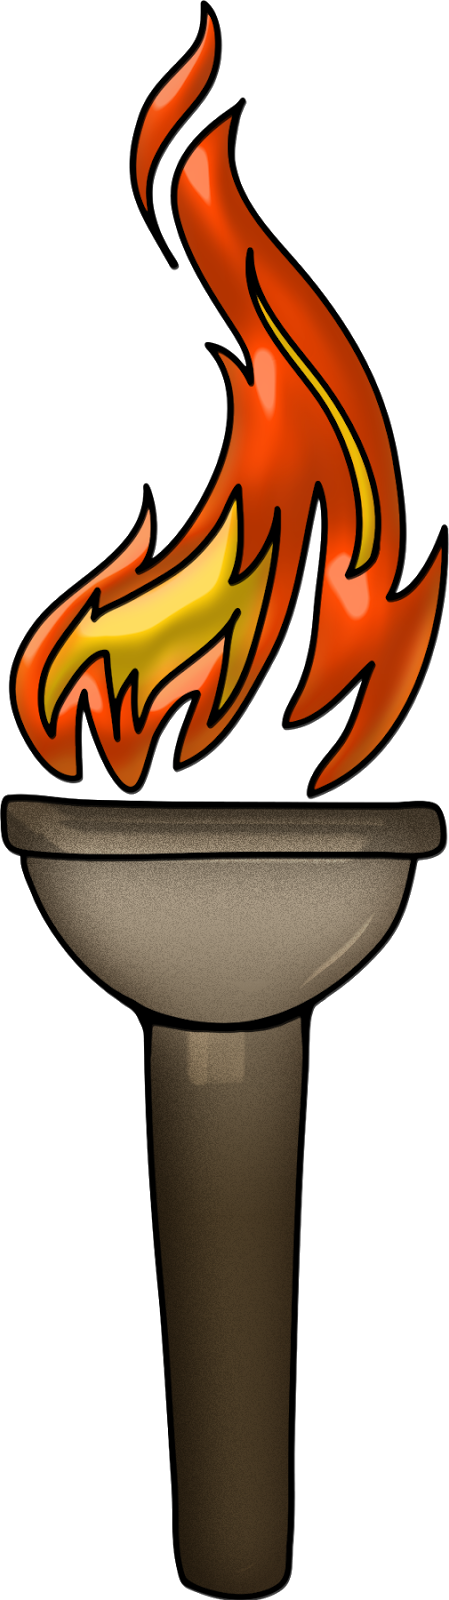 Caveman clipart torch, Caveman torch Transparent FREE for